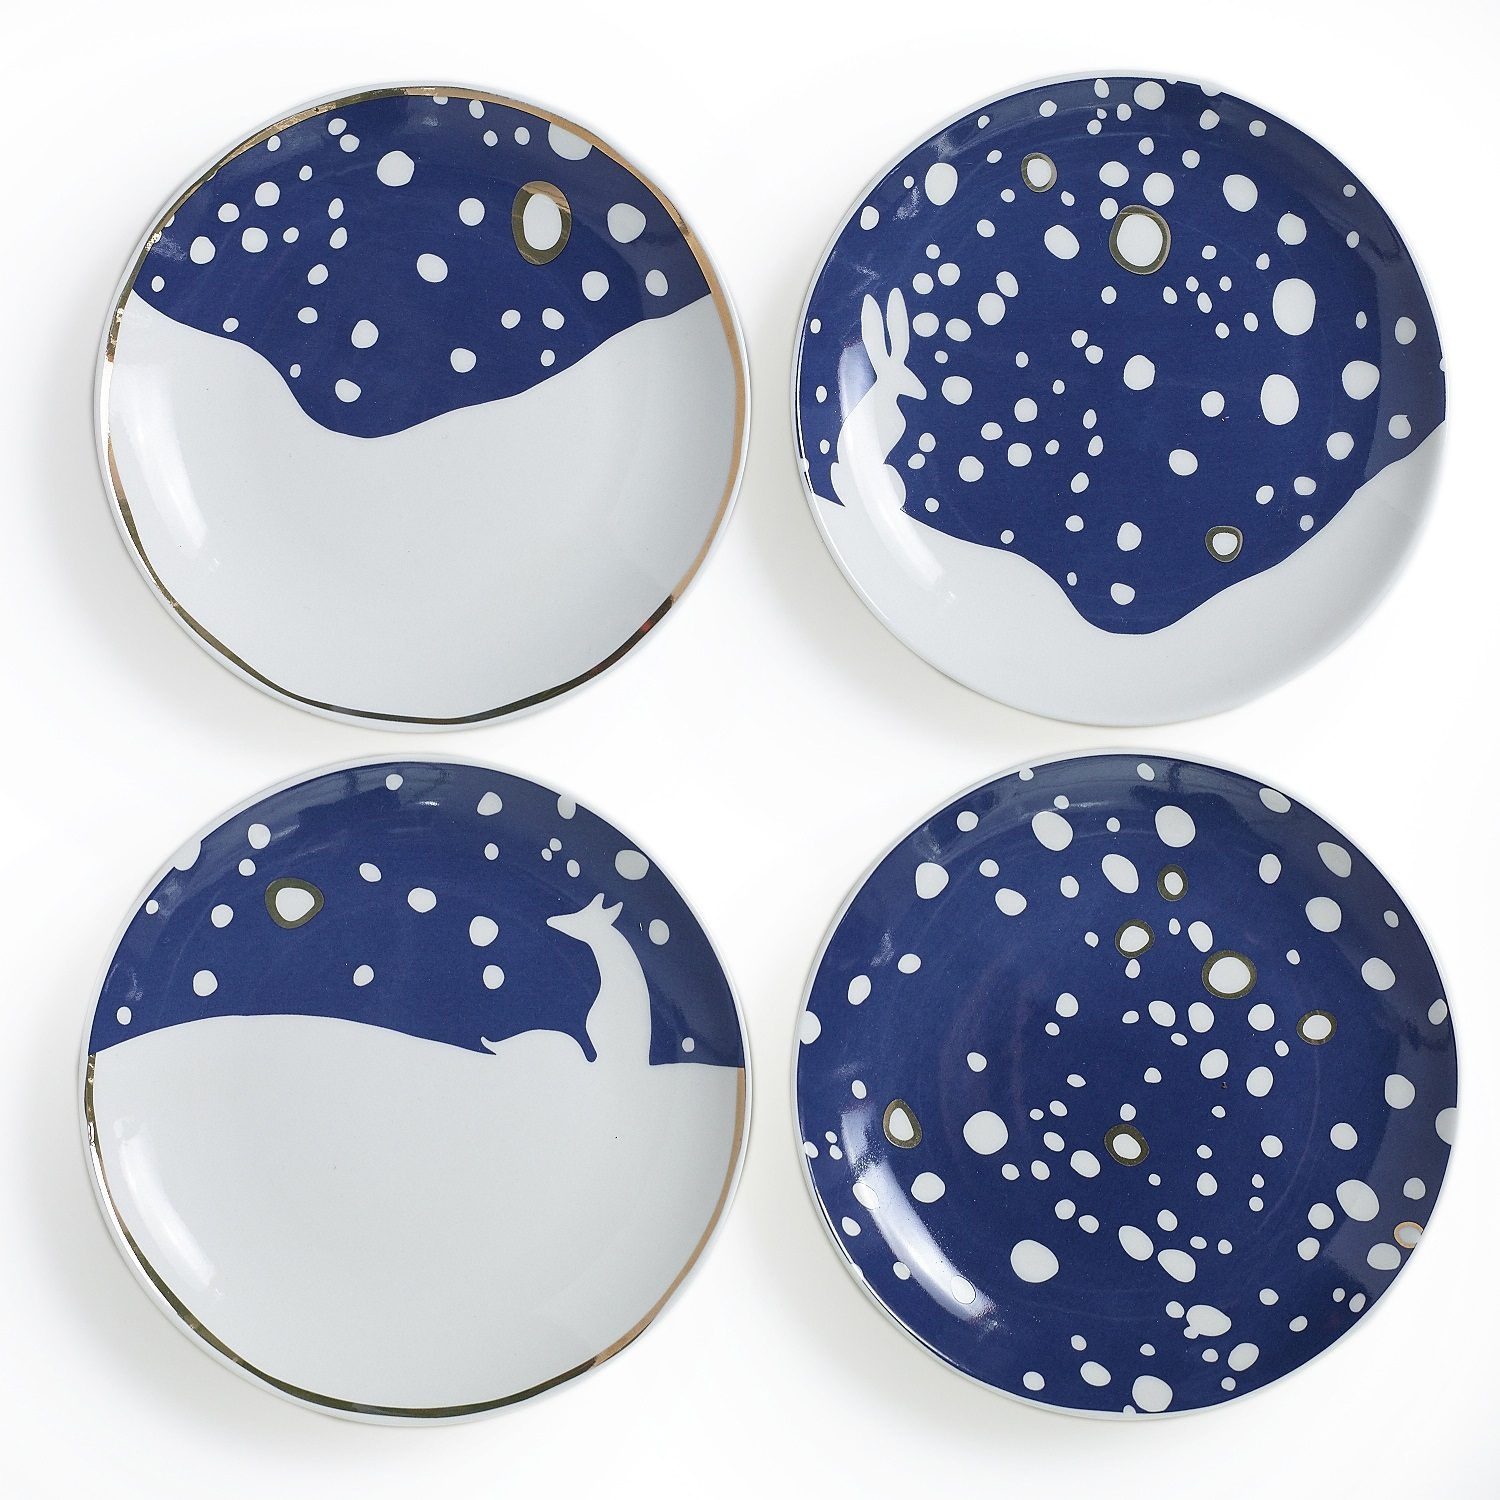 Set of 4 Eric + Eloise Snowy Plates in Navy, White & Gold